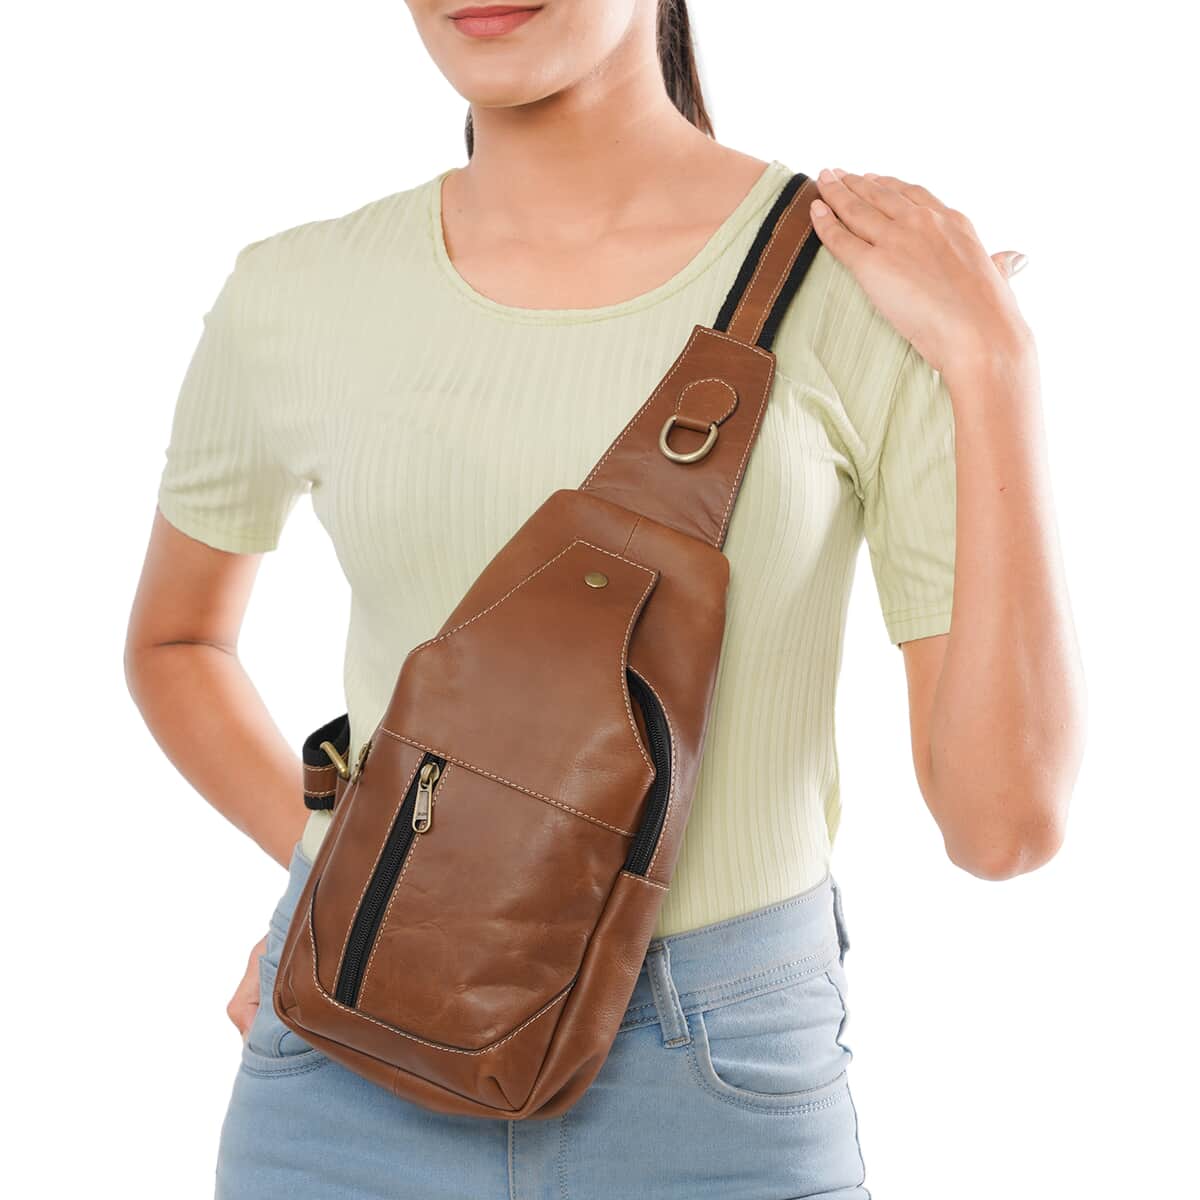 "100% Genuine Leather anti theft backpack bag Color: Beige Size: 5.9L x 3.2W x 8.66H inches " image number 1